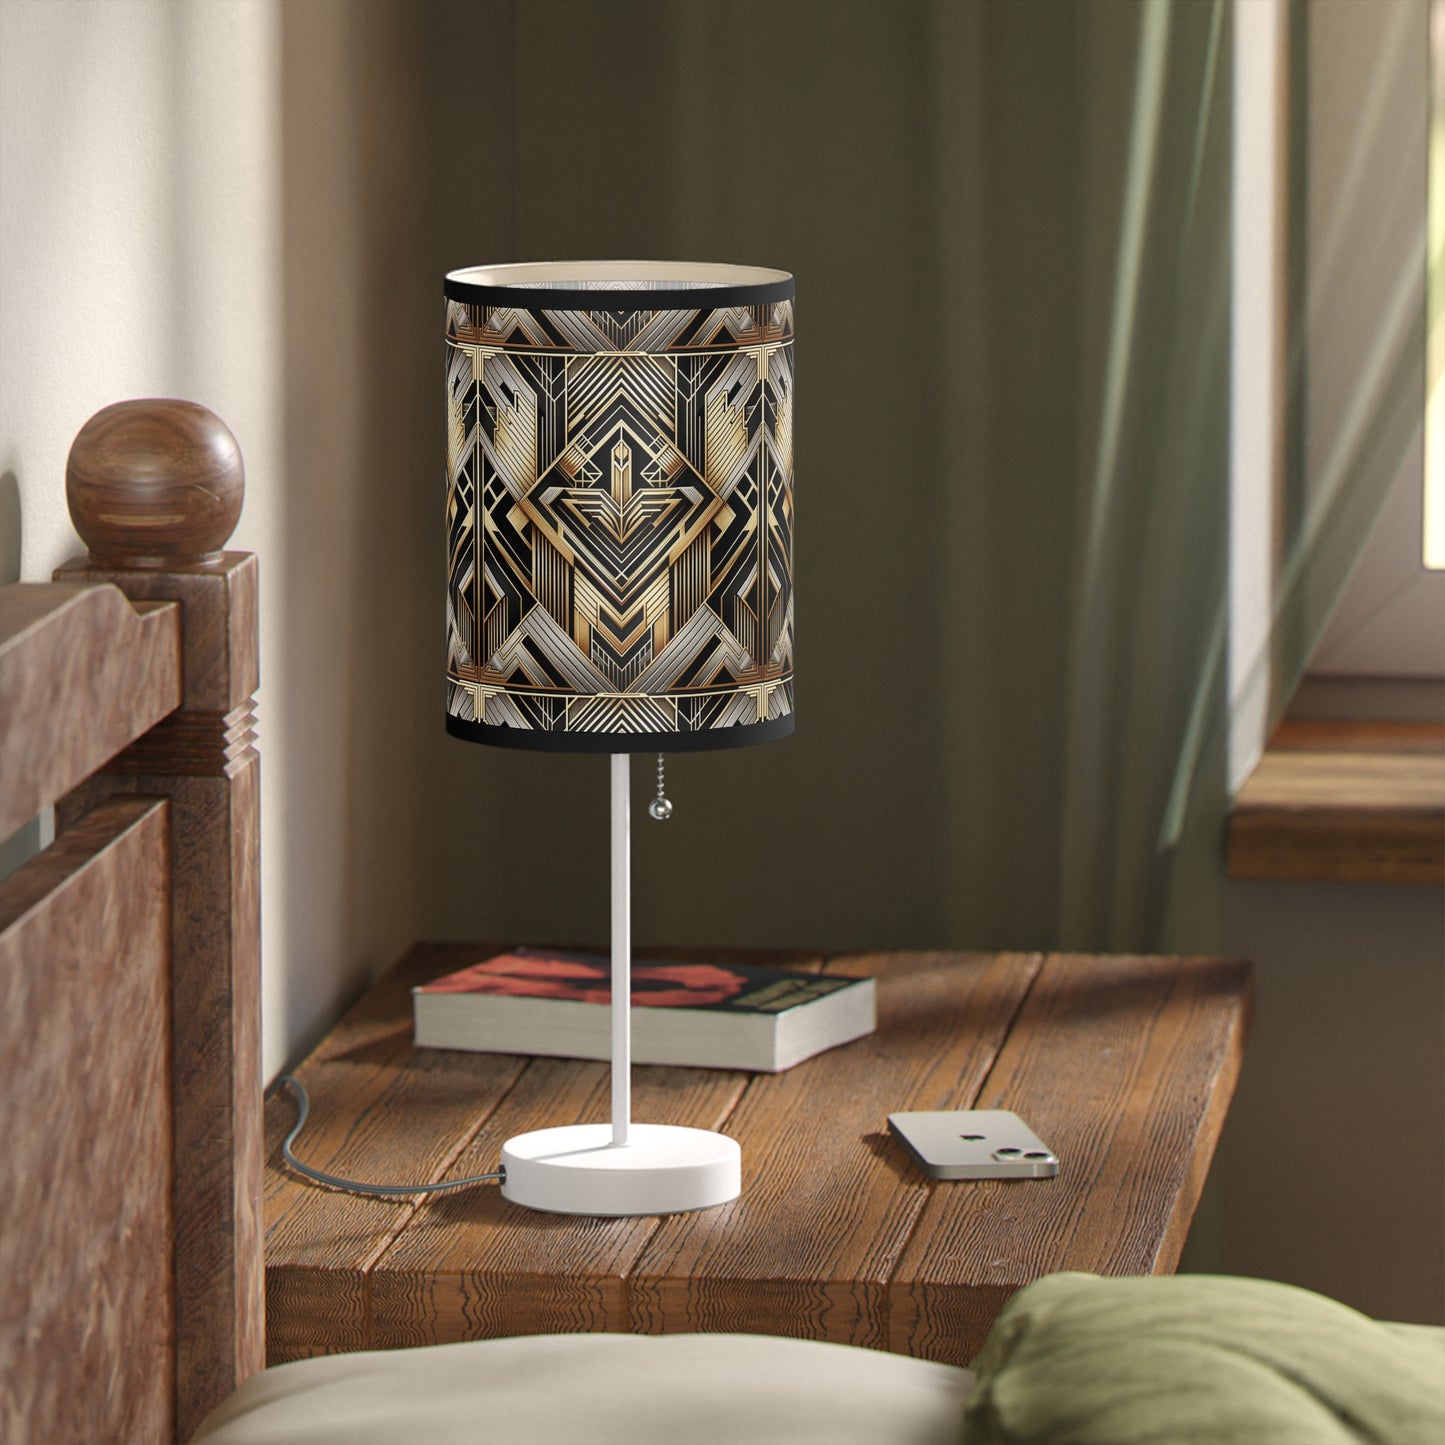 Deco Elegance Table Lamp with Art Deco-Inspired Pattern